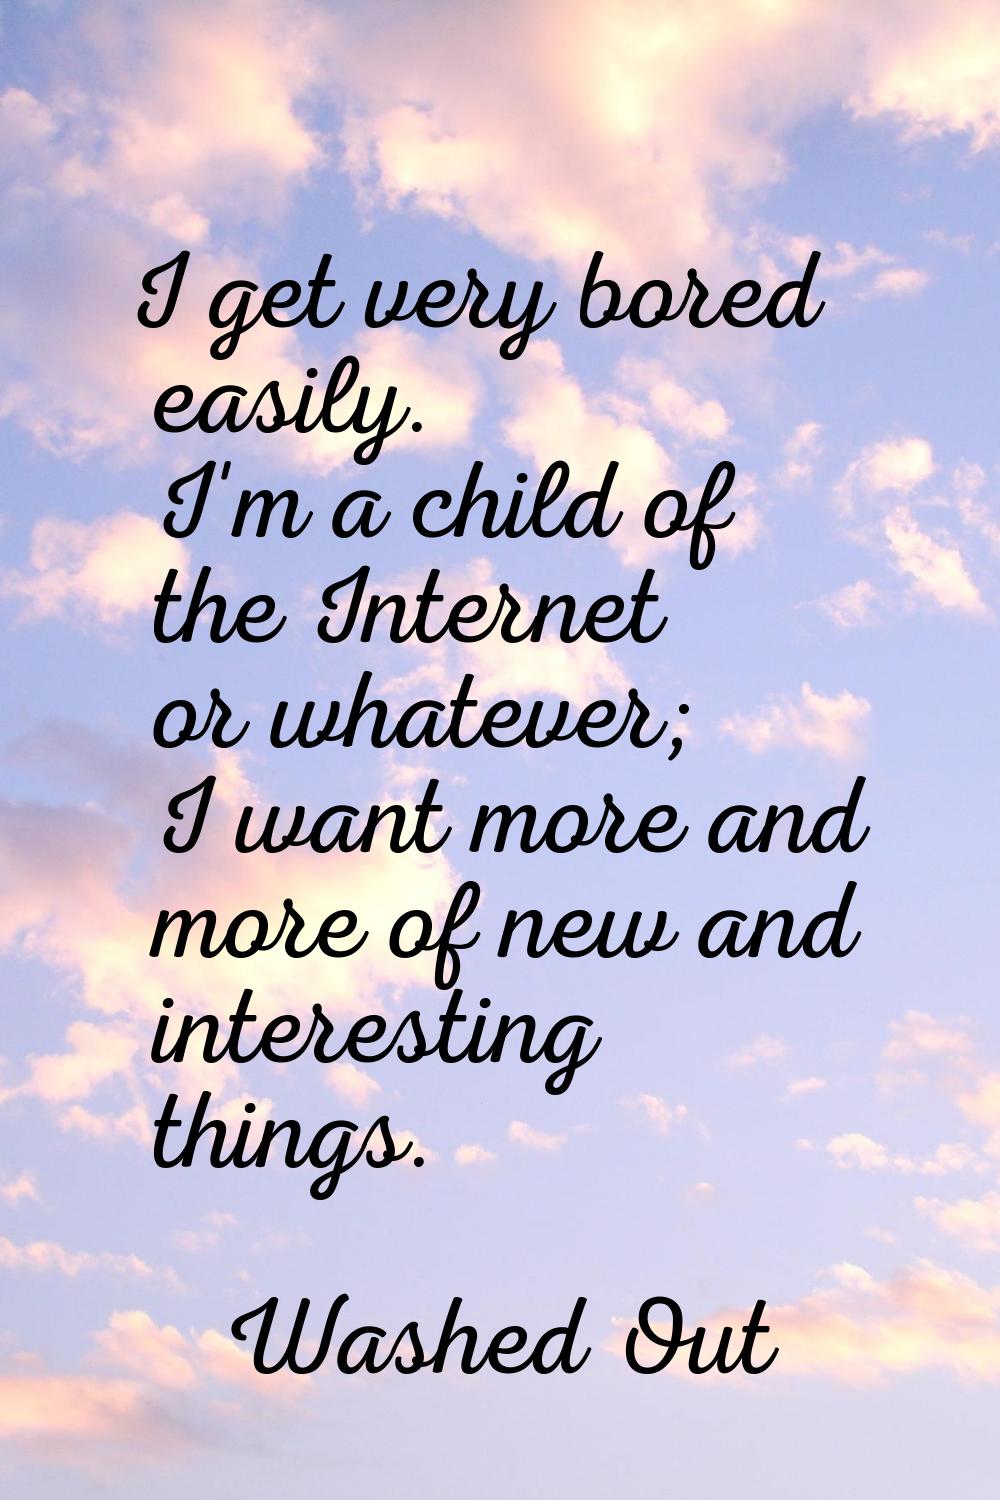 I get very bored easily. I'm a child of the Internet or whatever; I want more and more of new and i